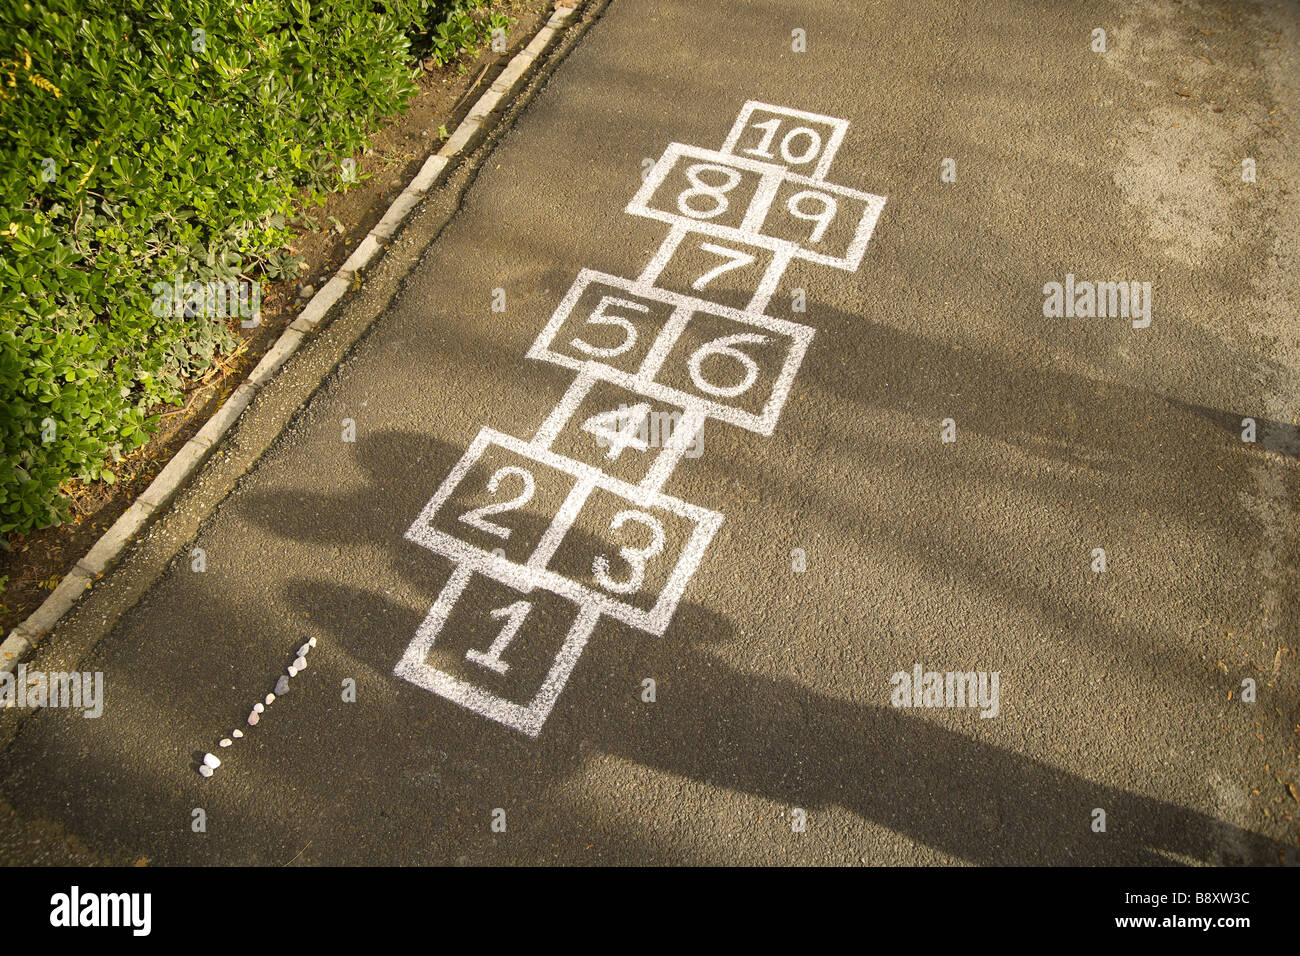 Hopscotch games outdoors. Stock Photo